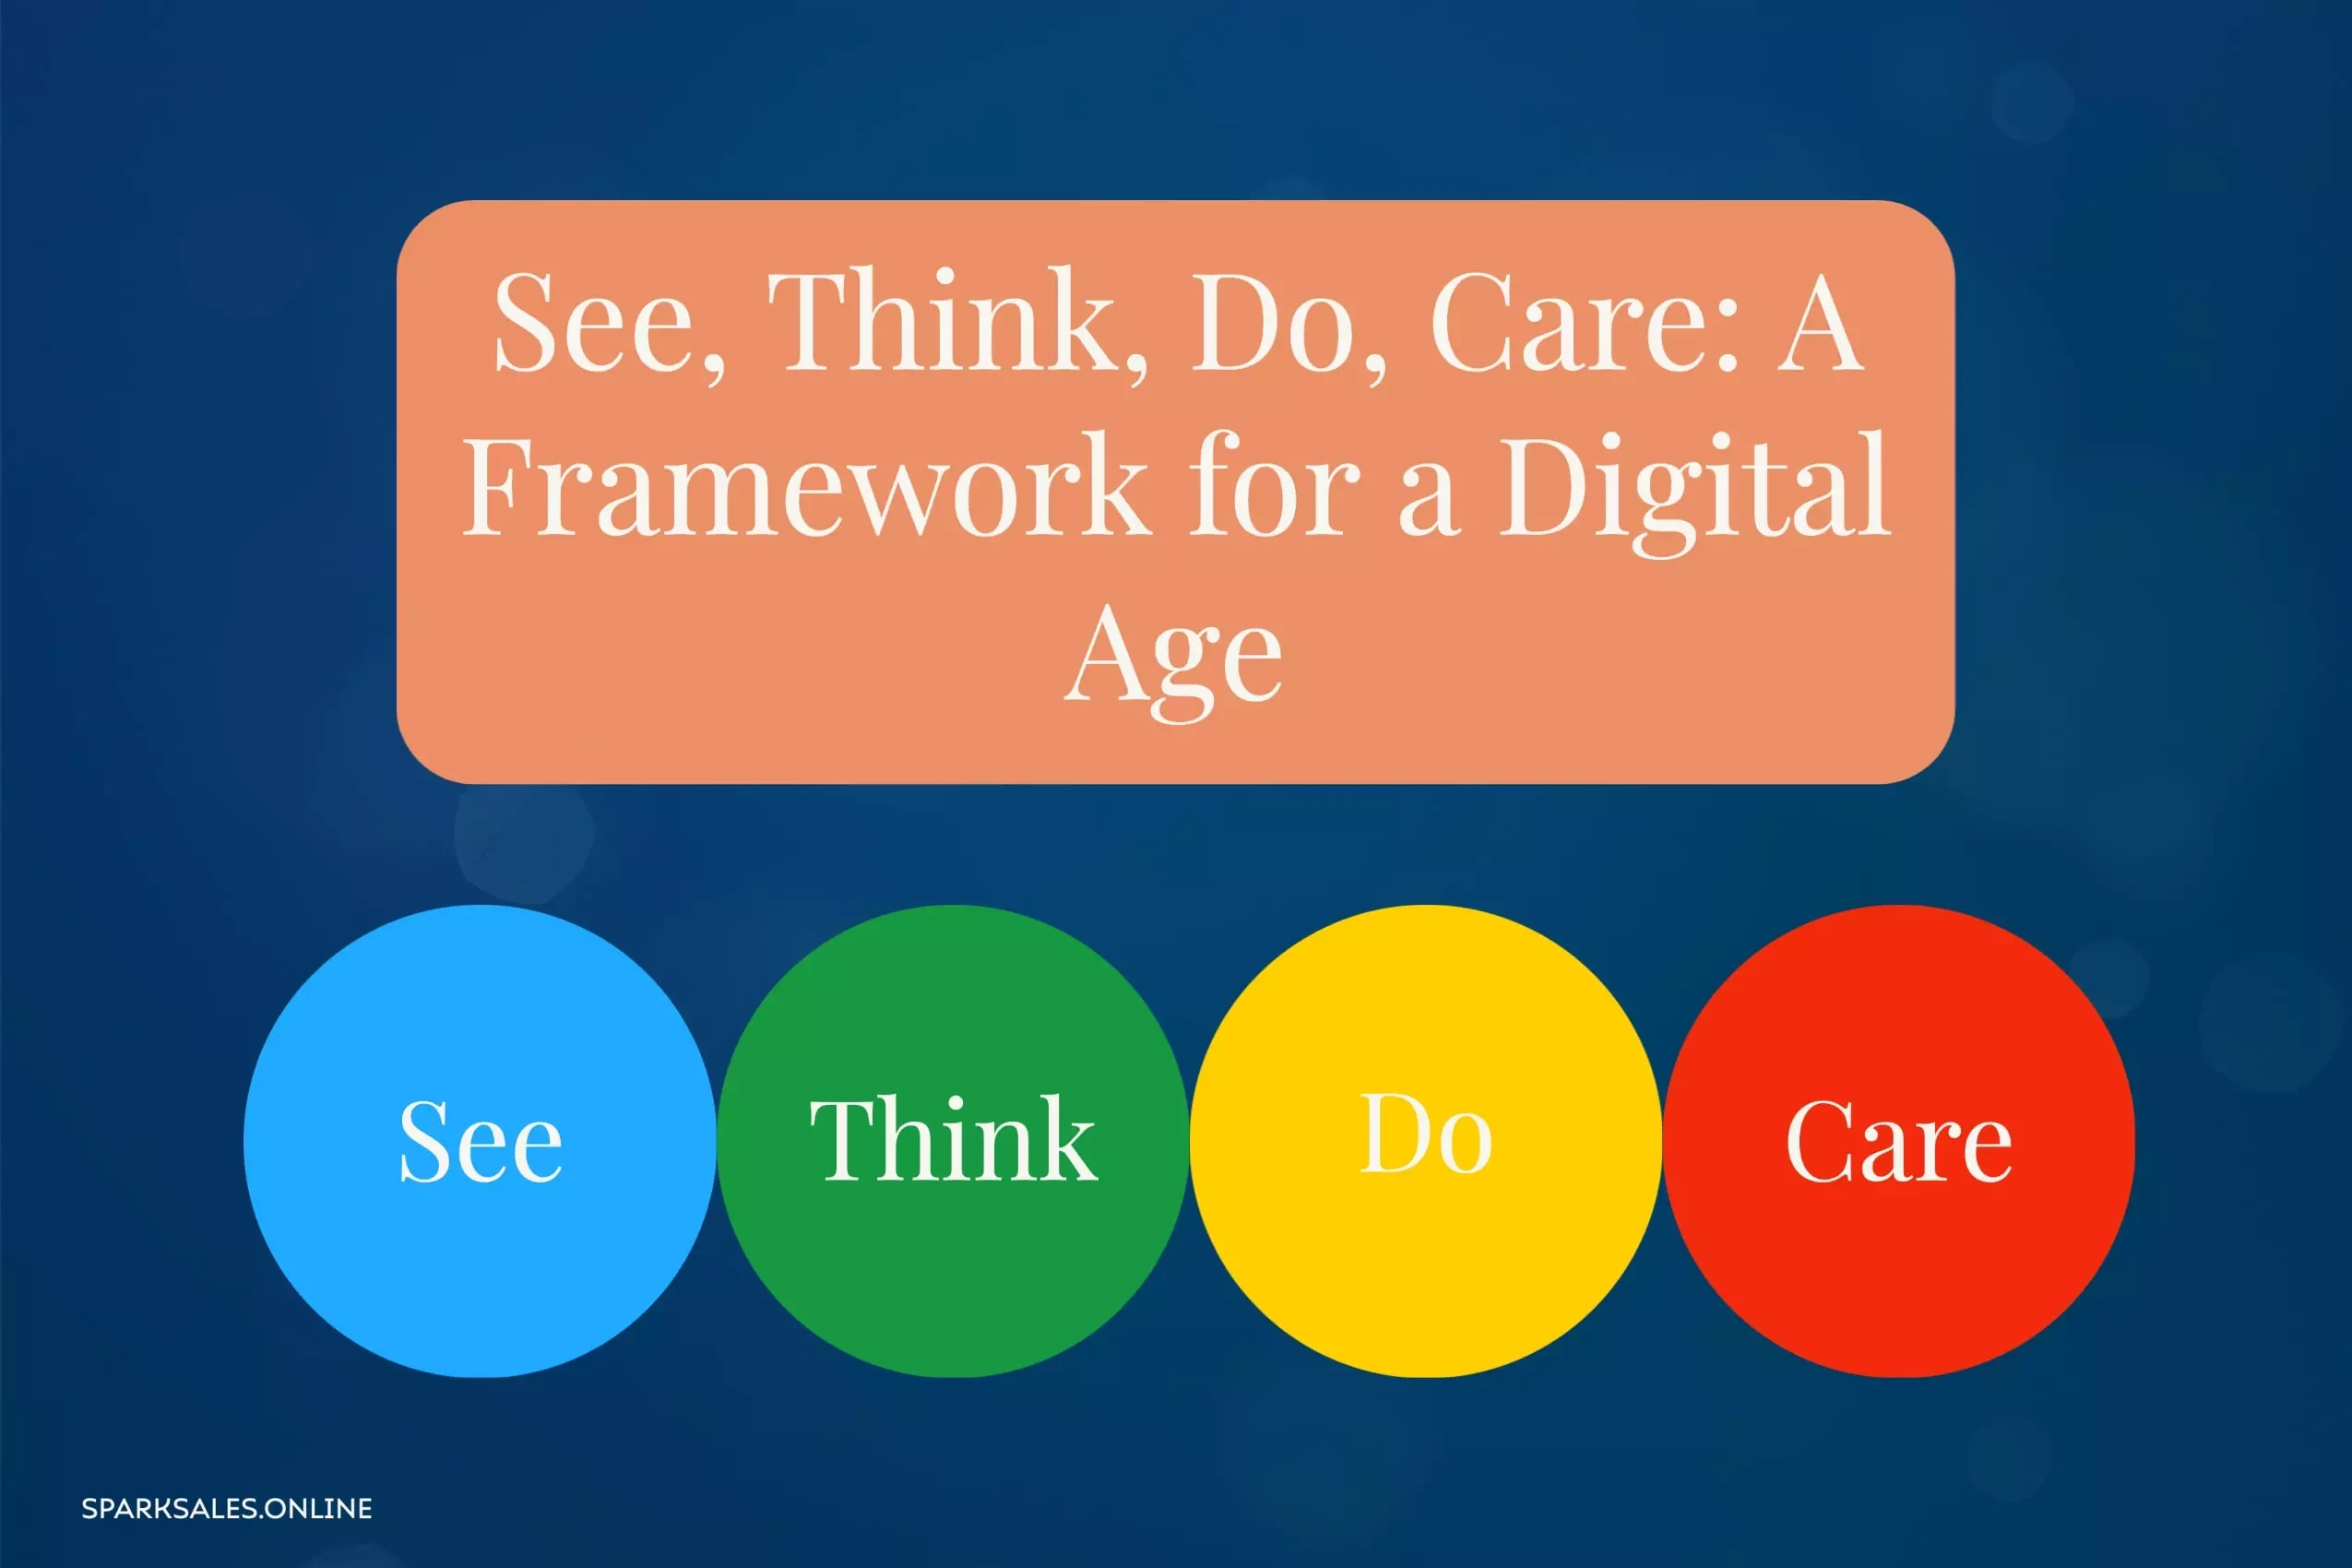 See, Think, Do, Care: A Framework for a Digital Age